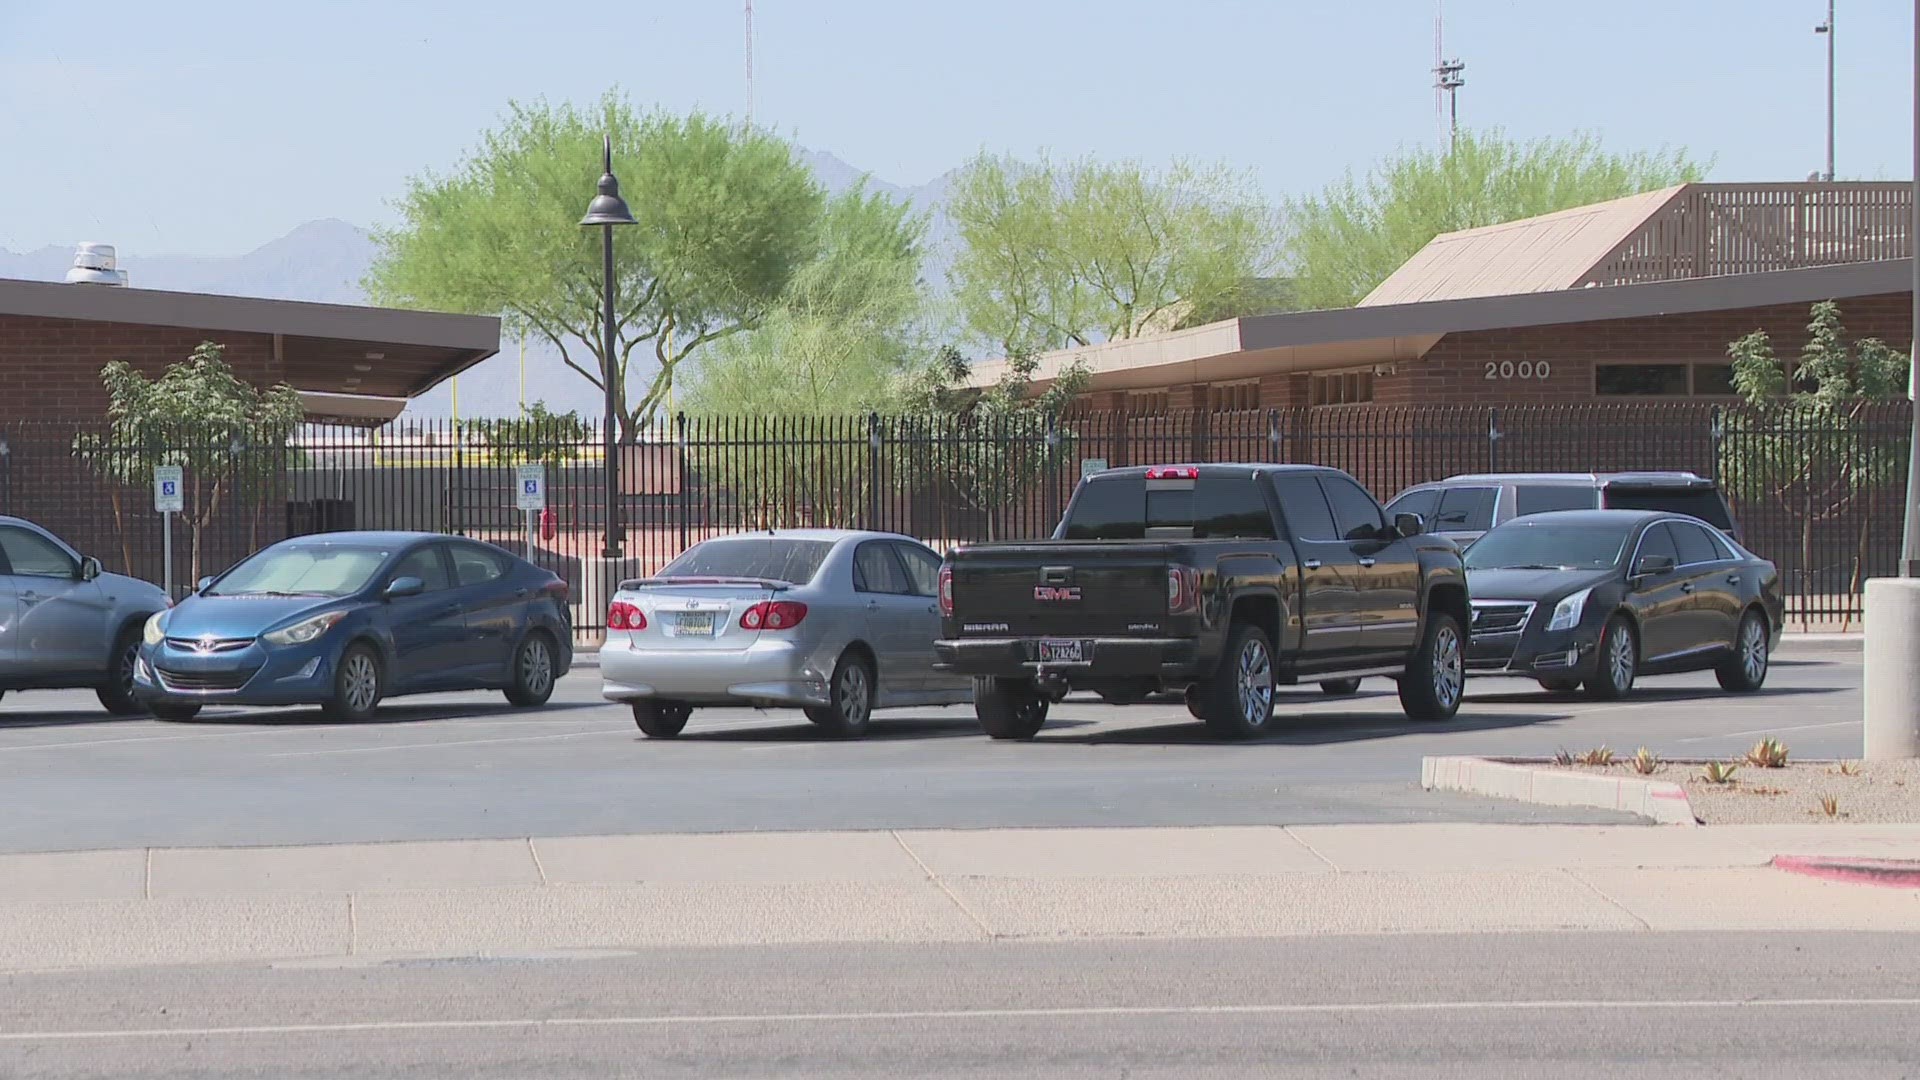 Tolleson Union High School District is taking a look at AI-assisted cameras to keep school grounds safe.